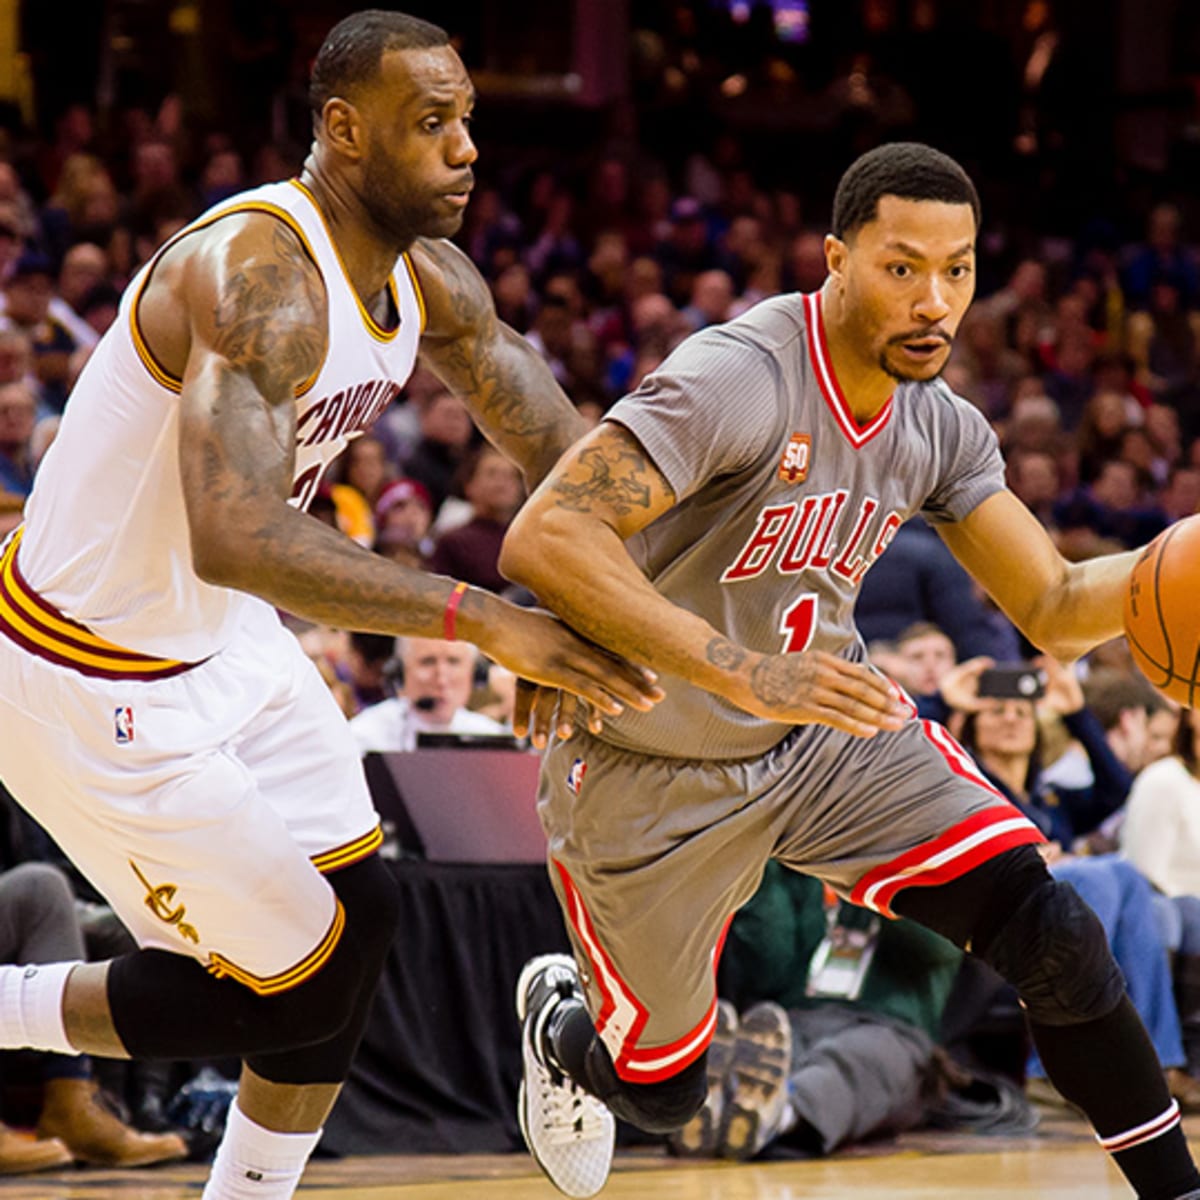 Chicago Bulls: What Legacy Does Derrick Rose Leave Behind in Chicago?